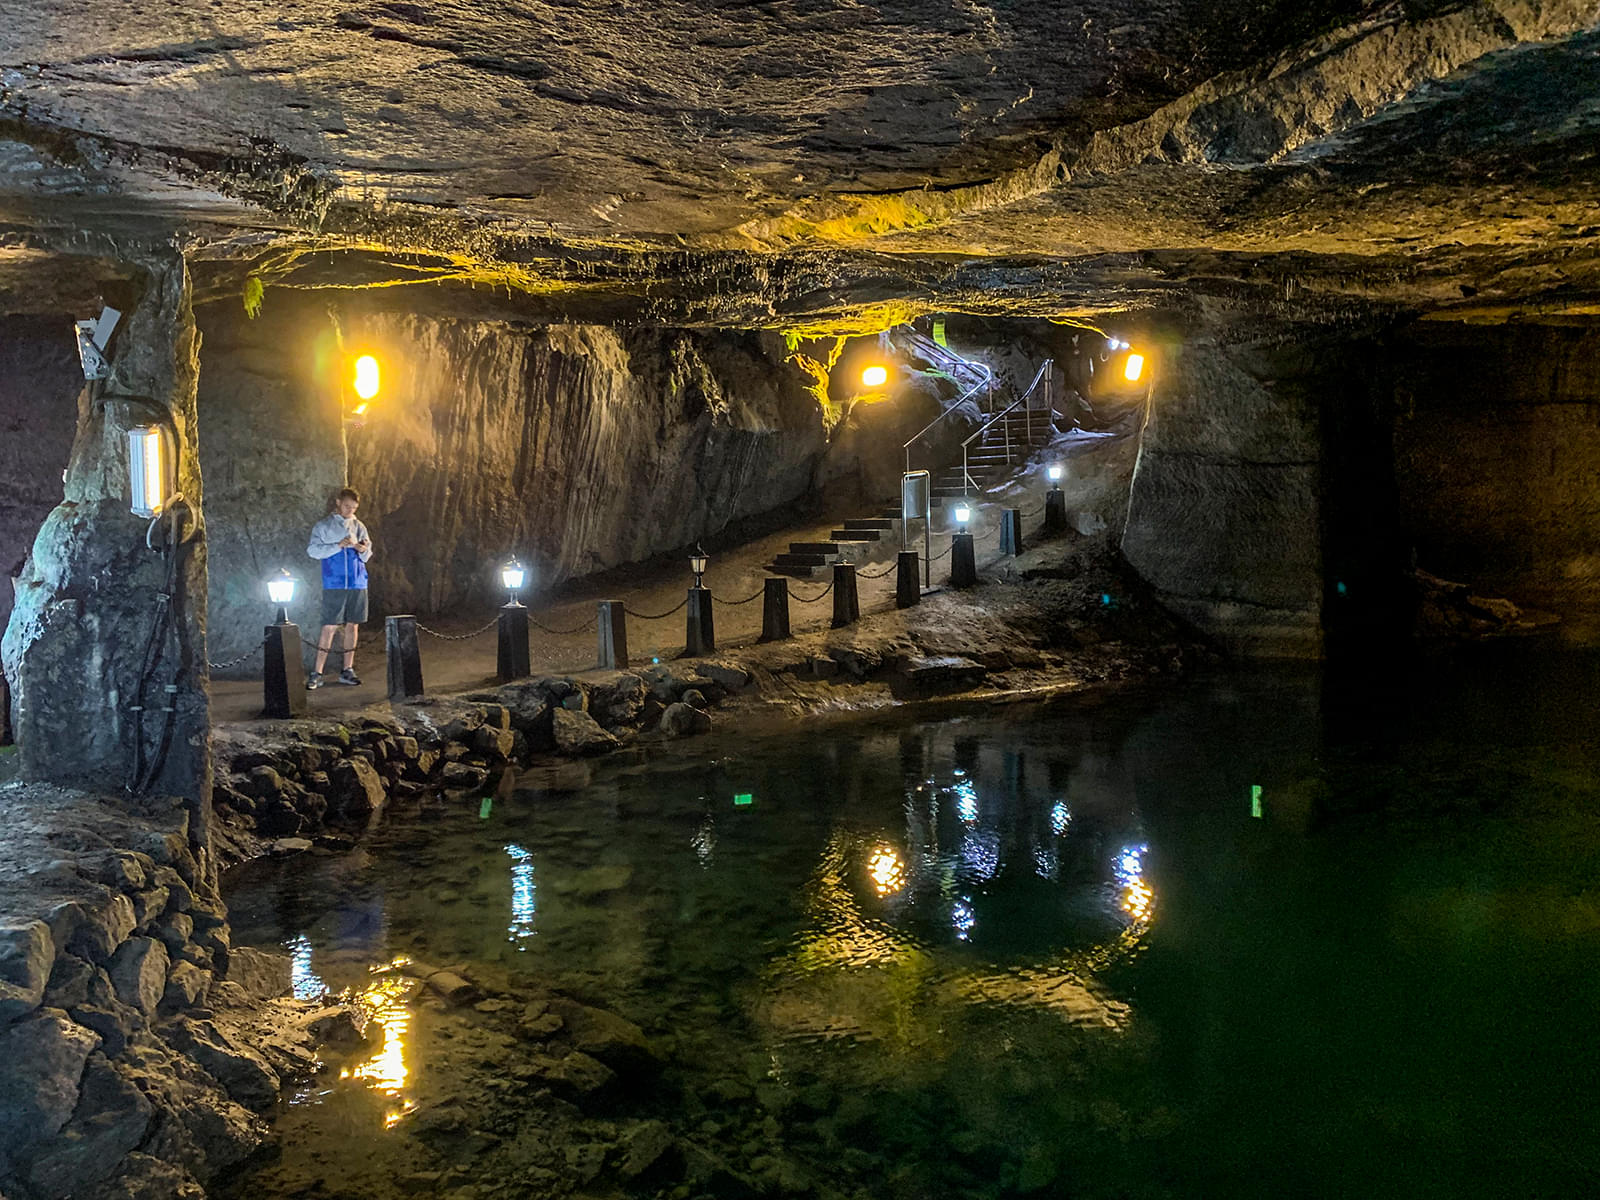 Check out the breathtaking underground pools